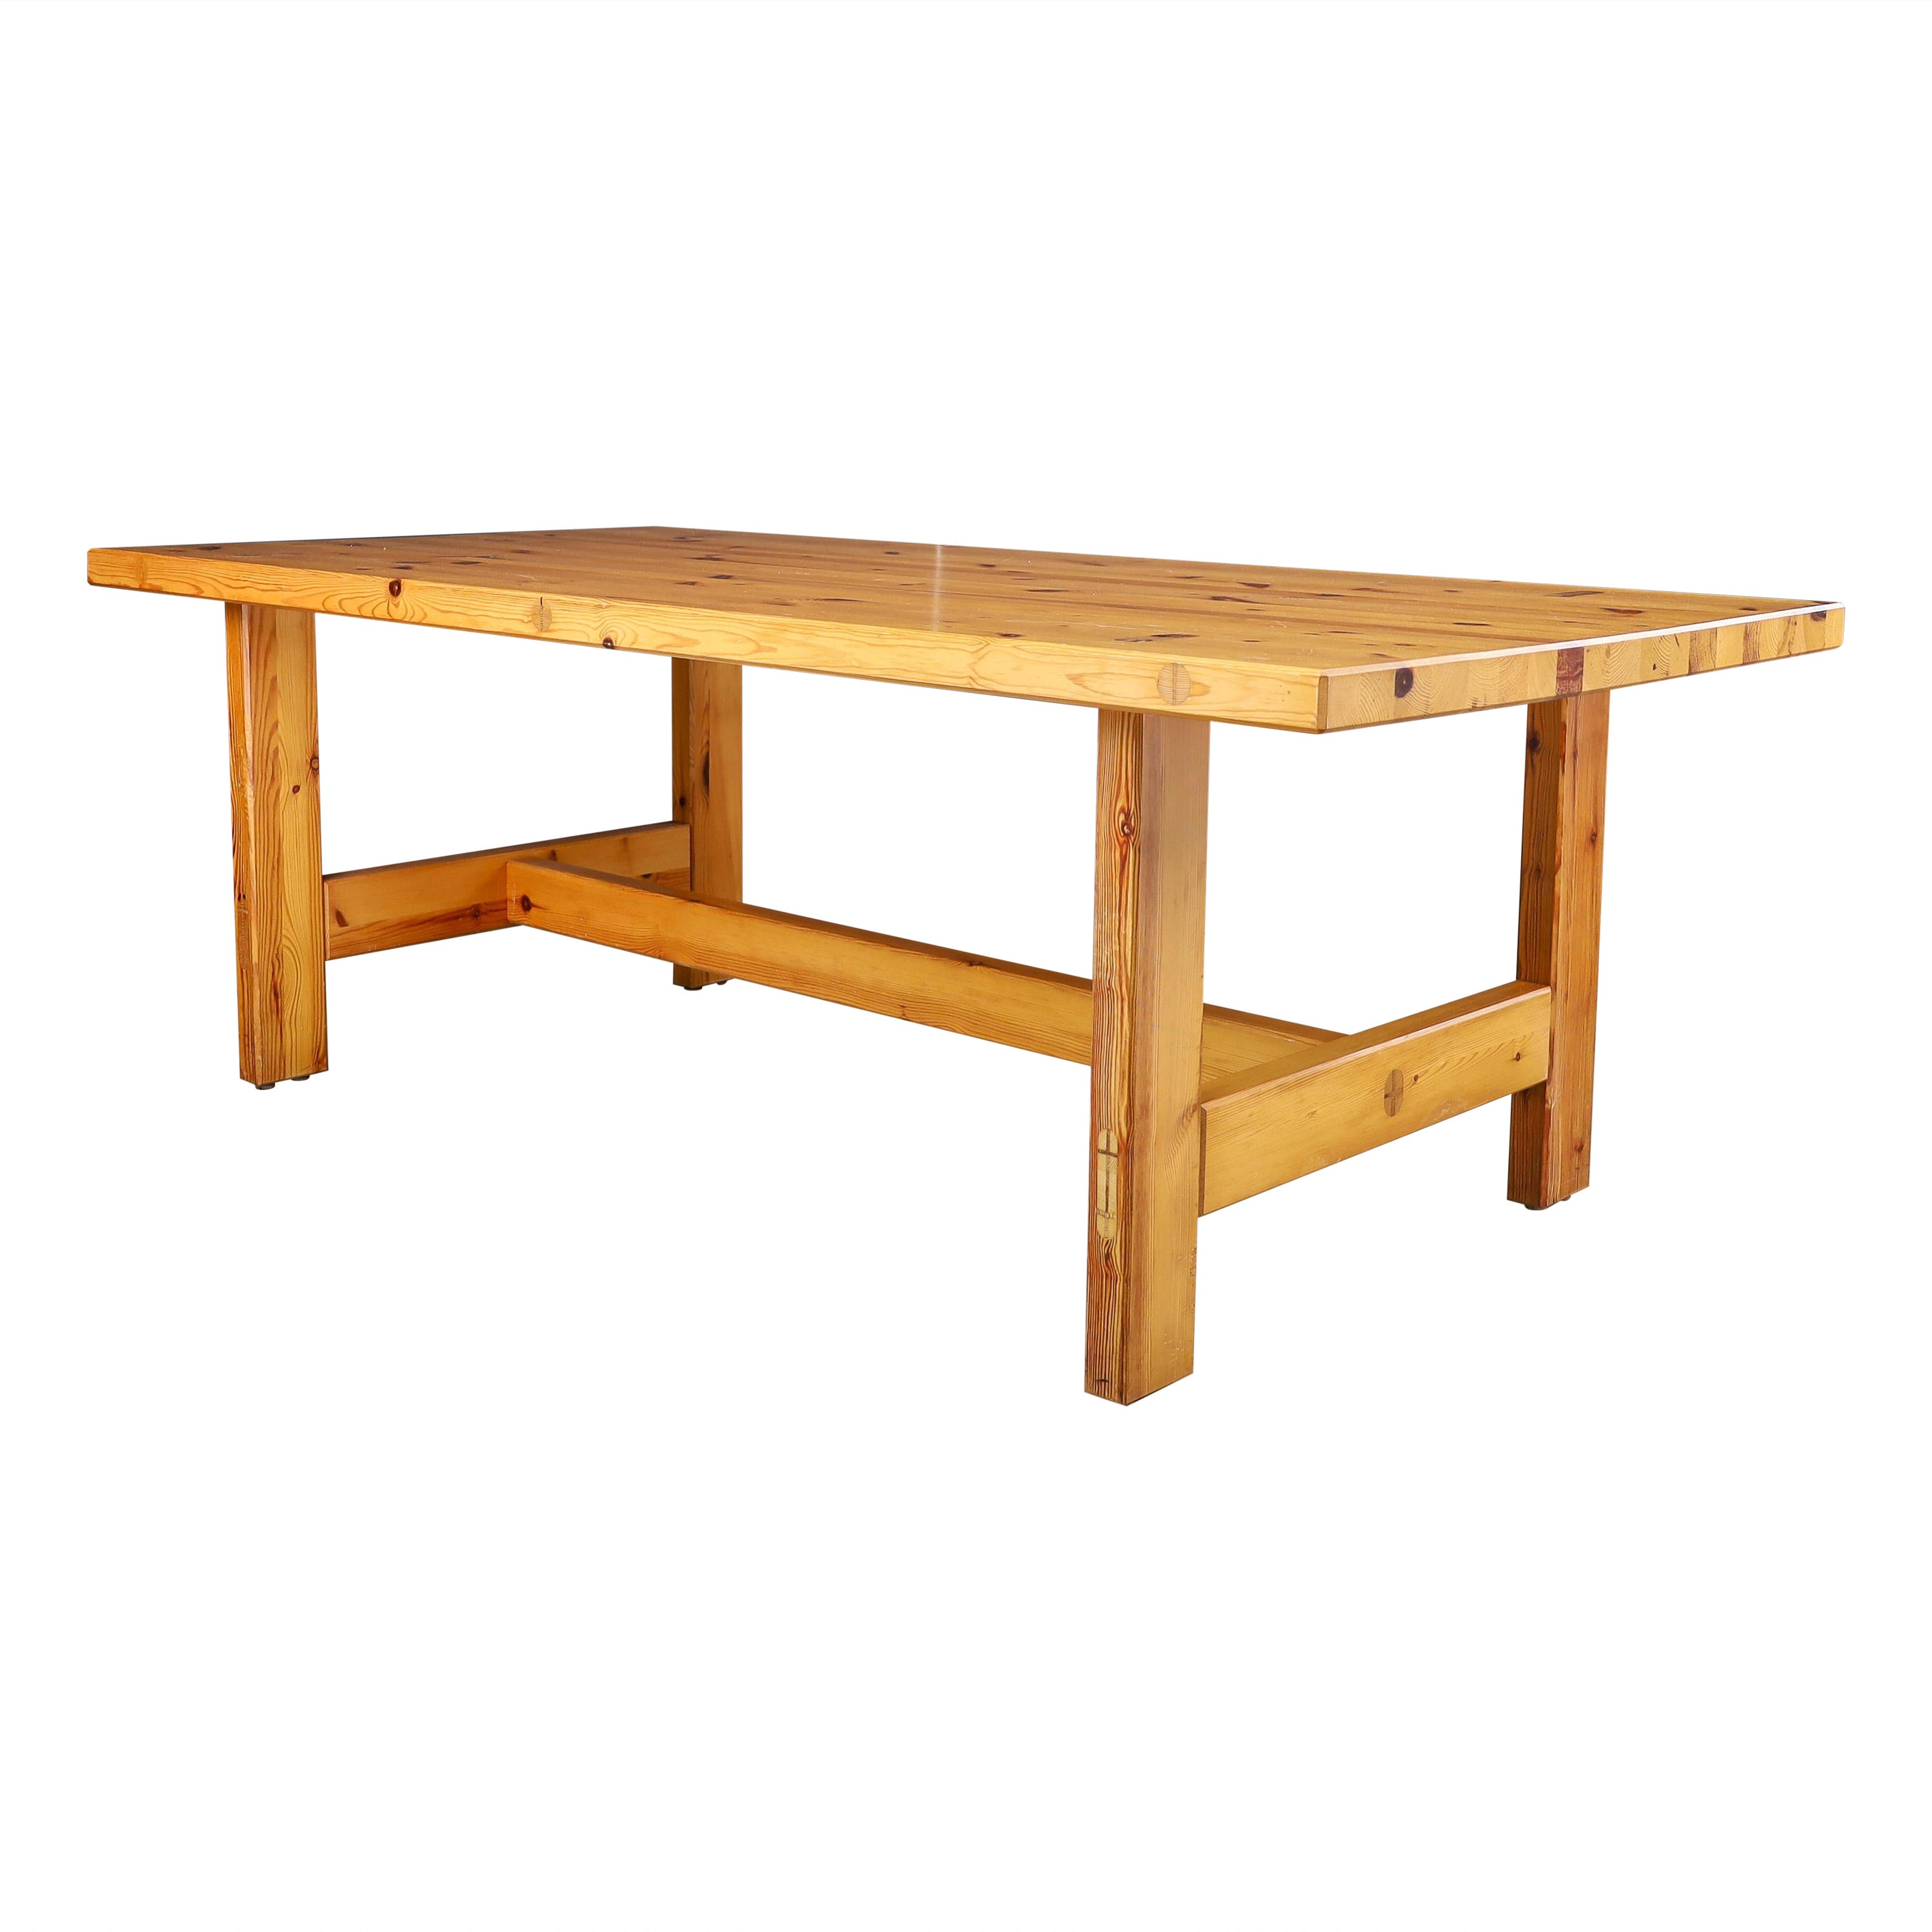 Roland Wilhelmsson for Karl Andersson & Söner Rectangular Solid Pine Table  1970 For Sale